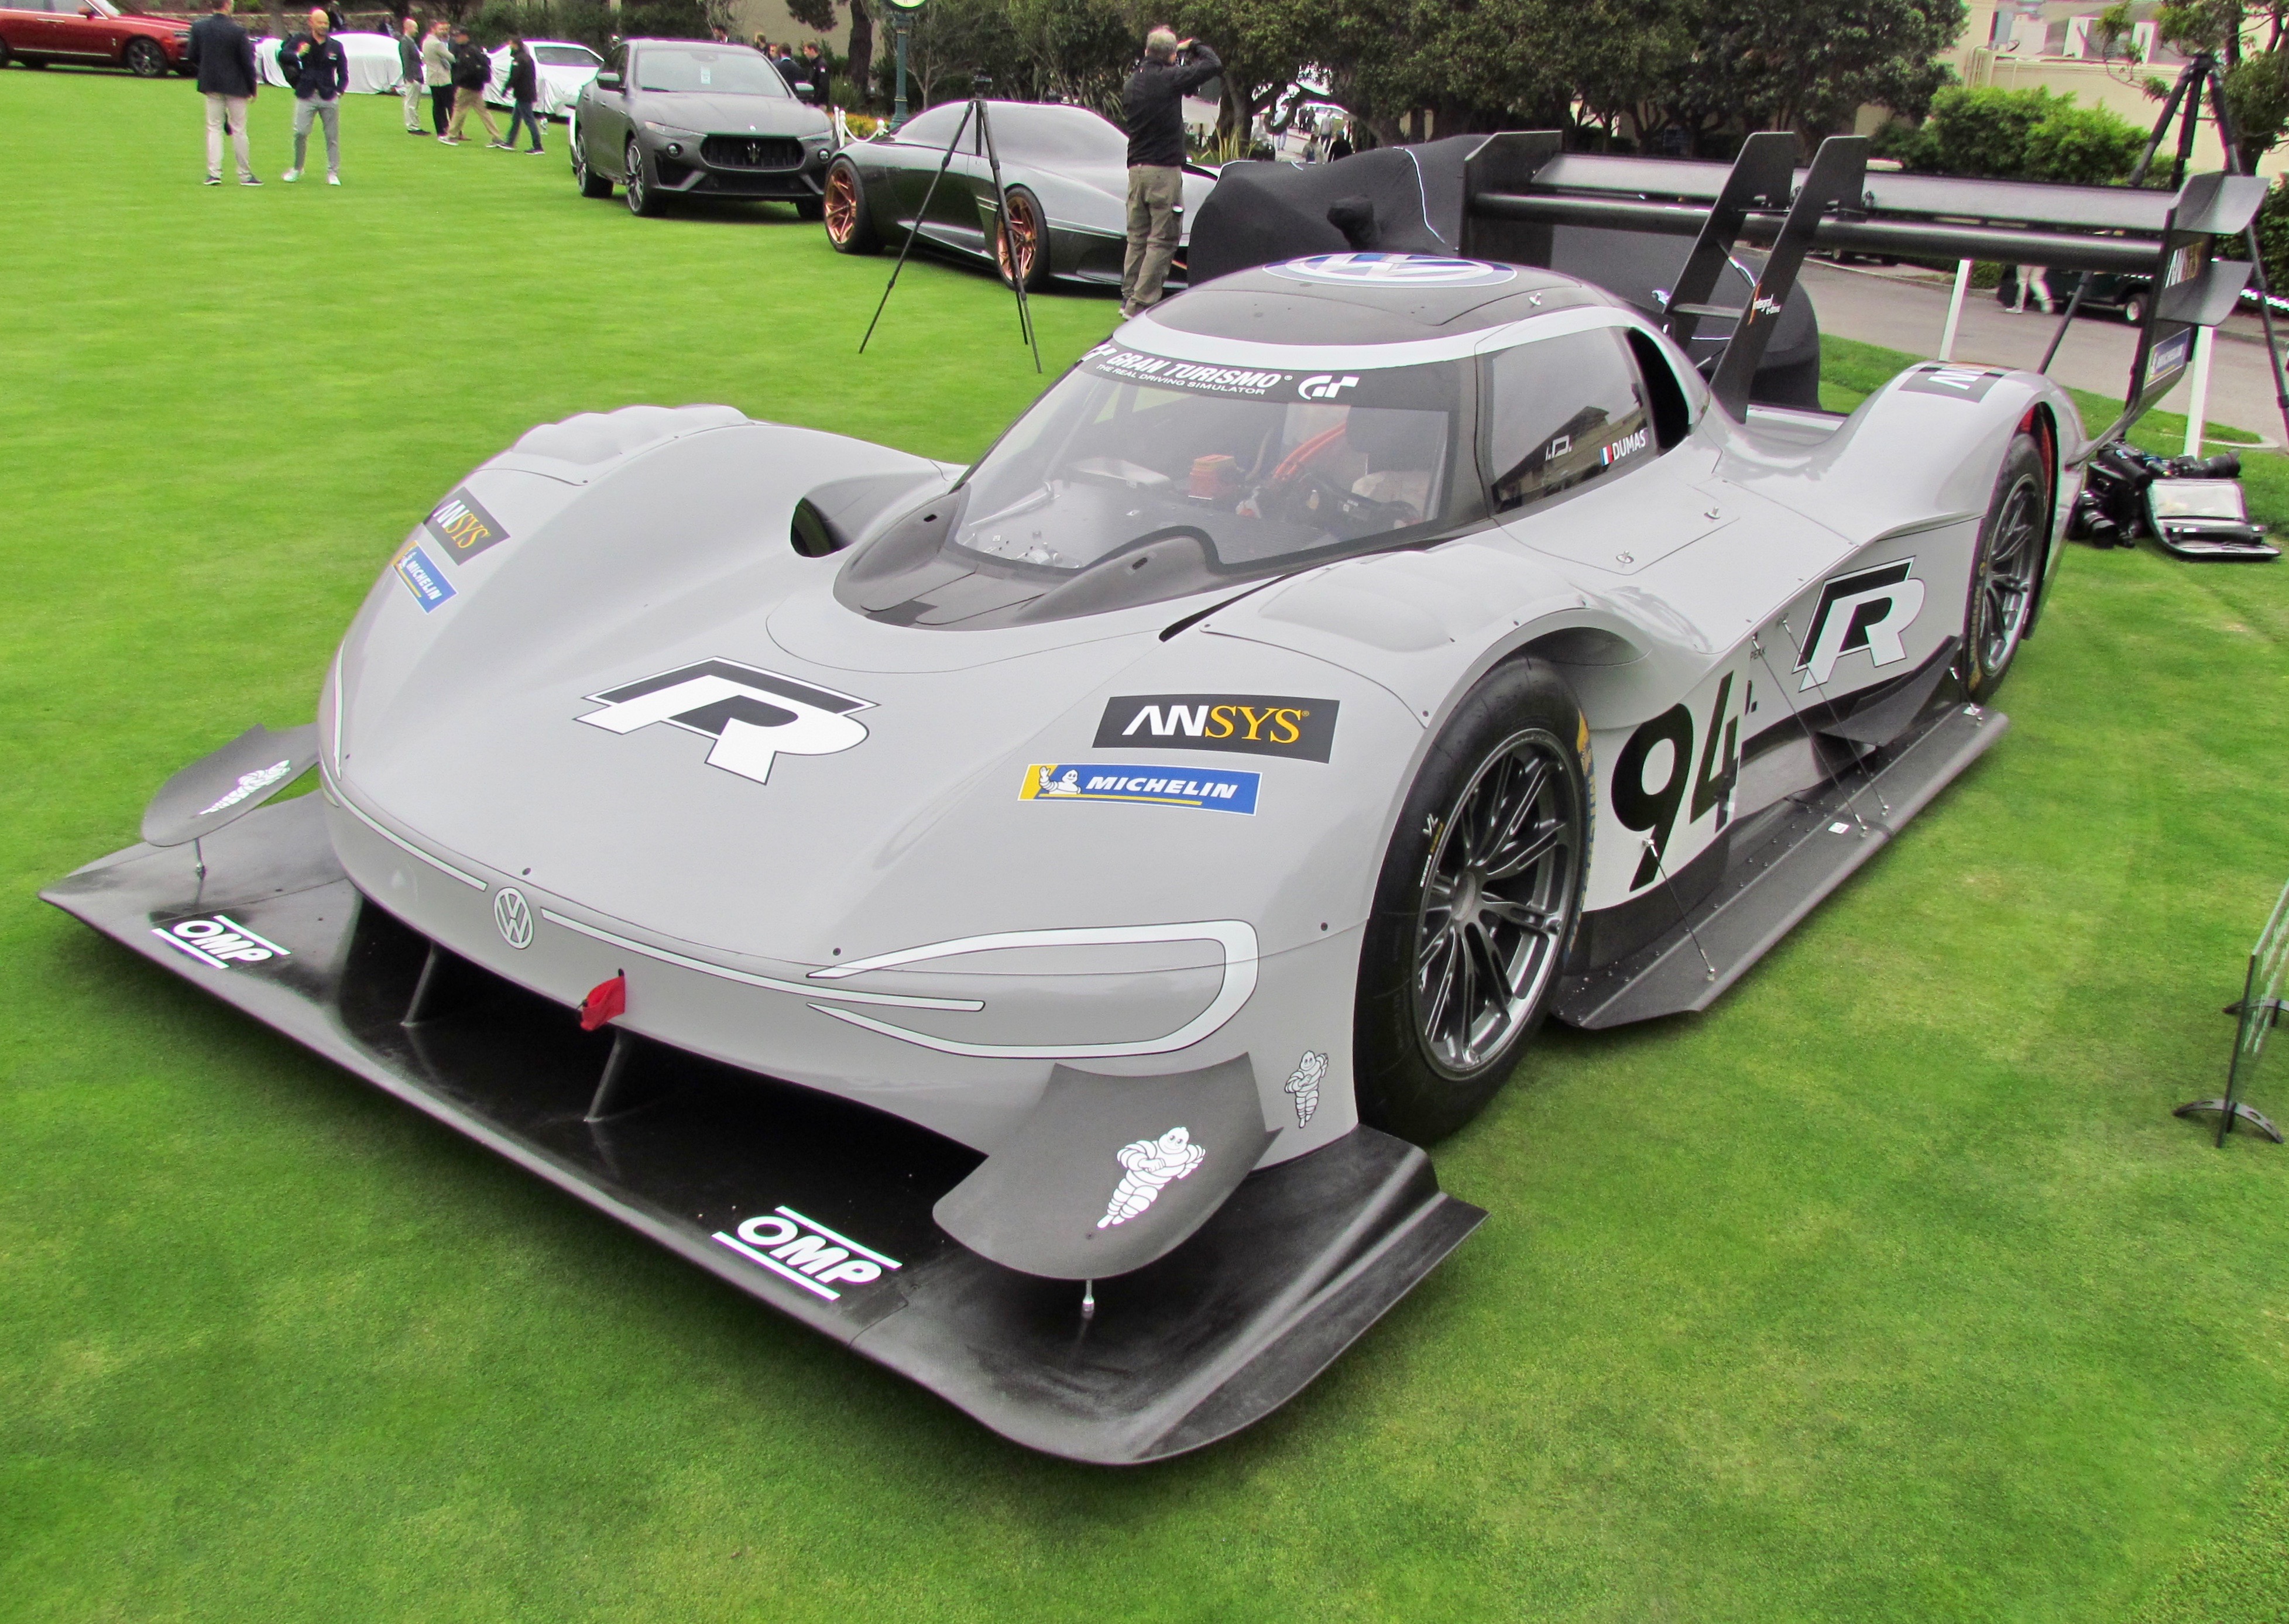 Pebble Beach, What a concept: Automakers showcase their visions for the future at Pebble Beach, ClassicCars.com Journal